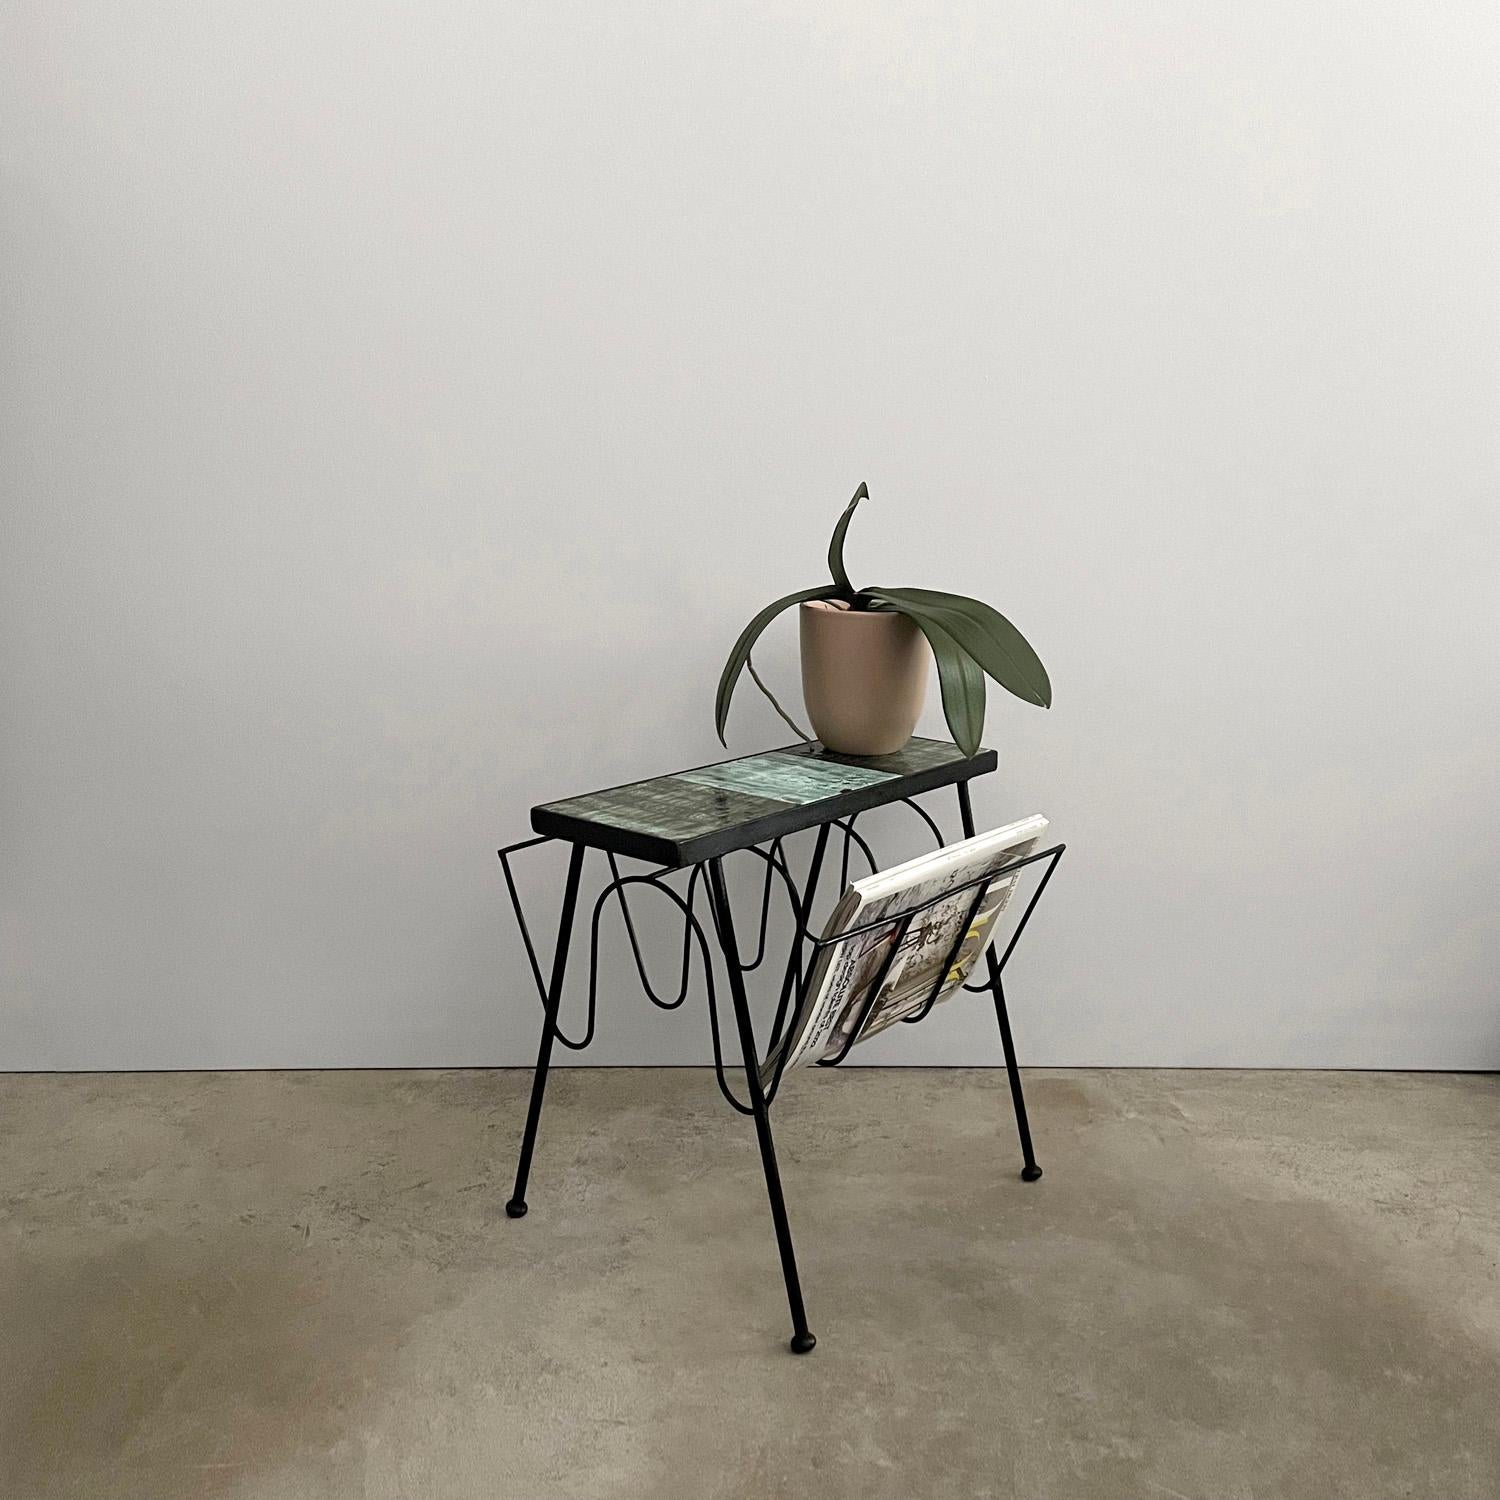 Italian ceramic iron magazine table
Italy, circa 1950s
Sleek, slender and multi-functional 
This little table packs a punch 
Upper portion has organic ceramic tiles which create the perfect side table surface 
Sculpted iron base has two angled